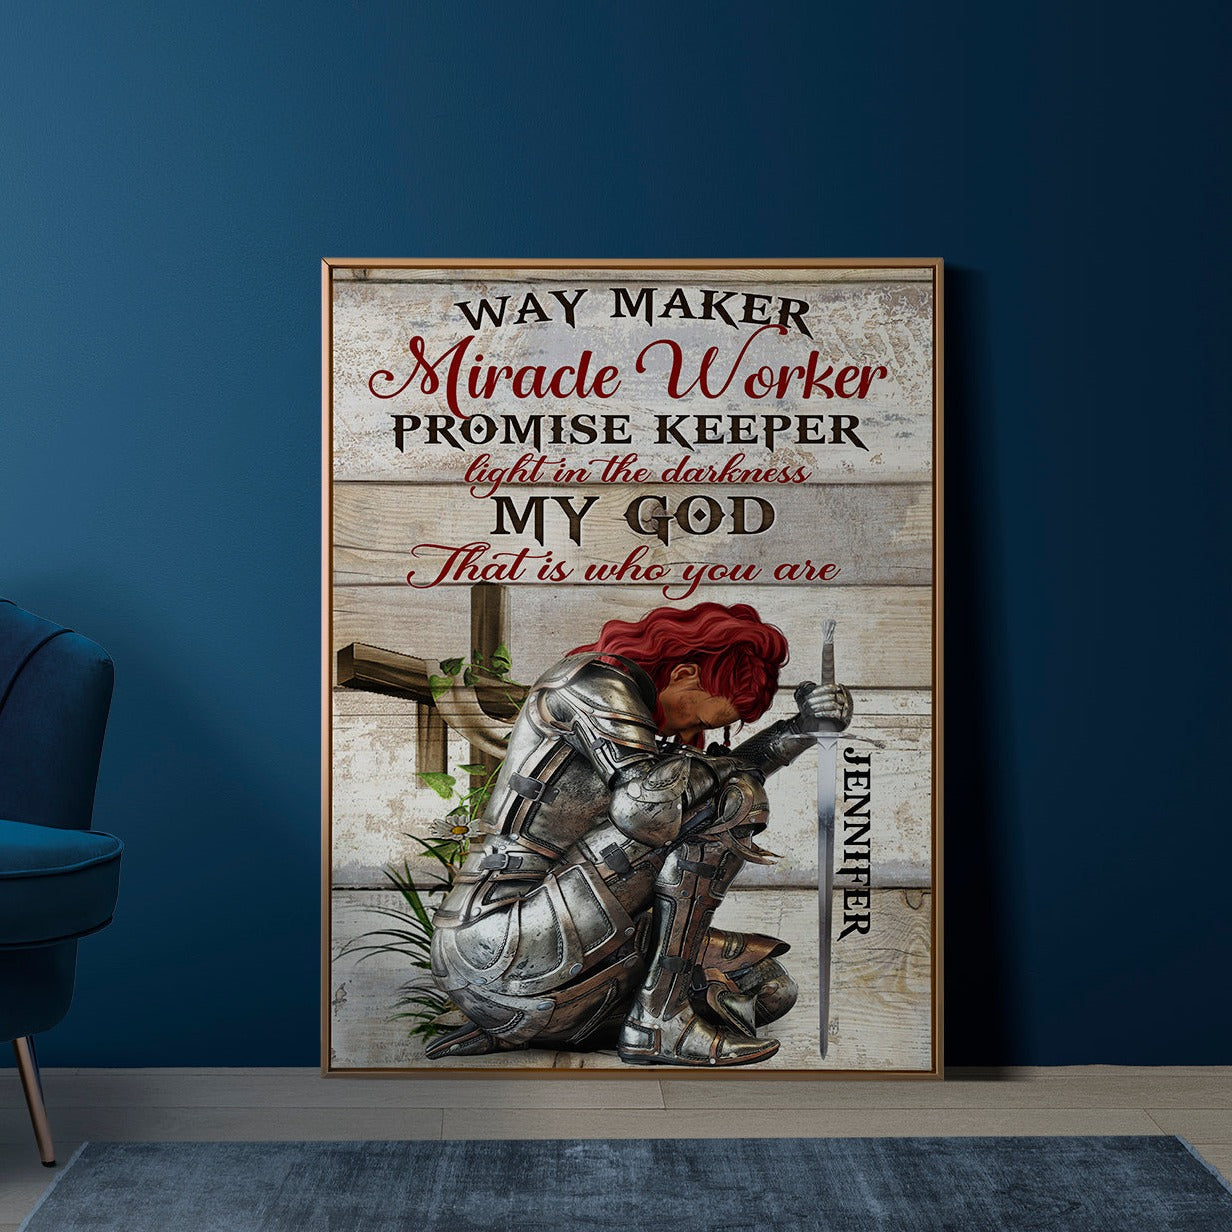 Personalized Woman Warrior Of God way Maker Miracle Worker Promise Keeper Light In The Darkness My God That Is What You Are Poster And Canvas